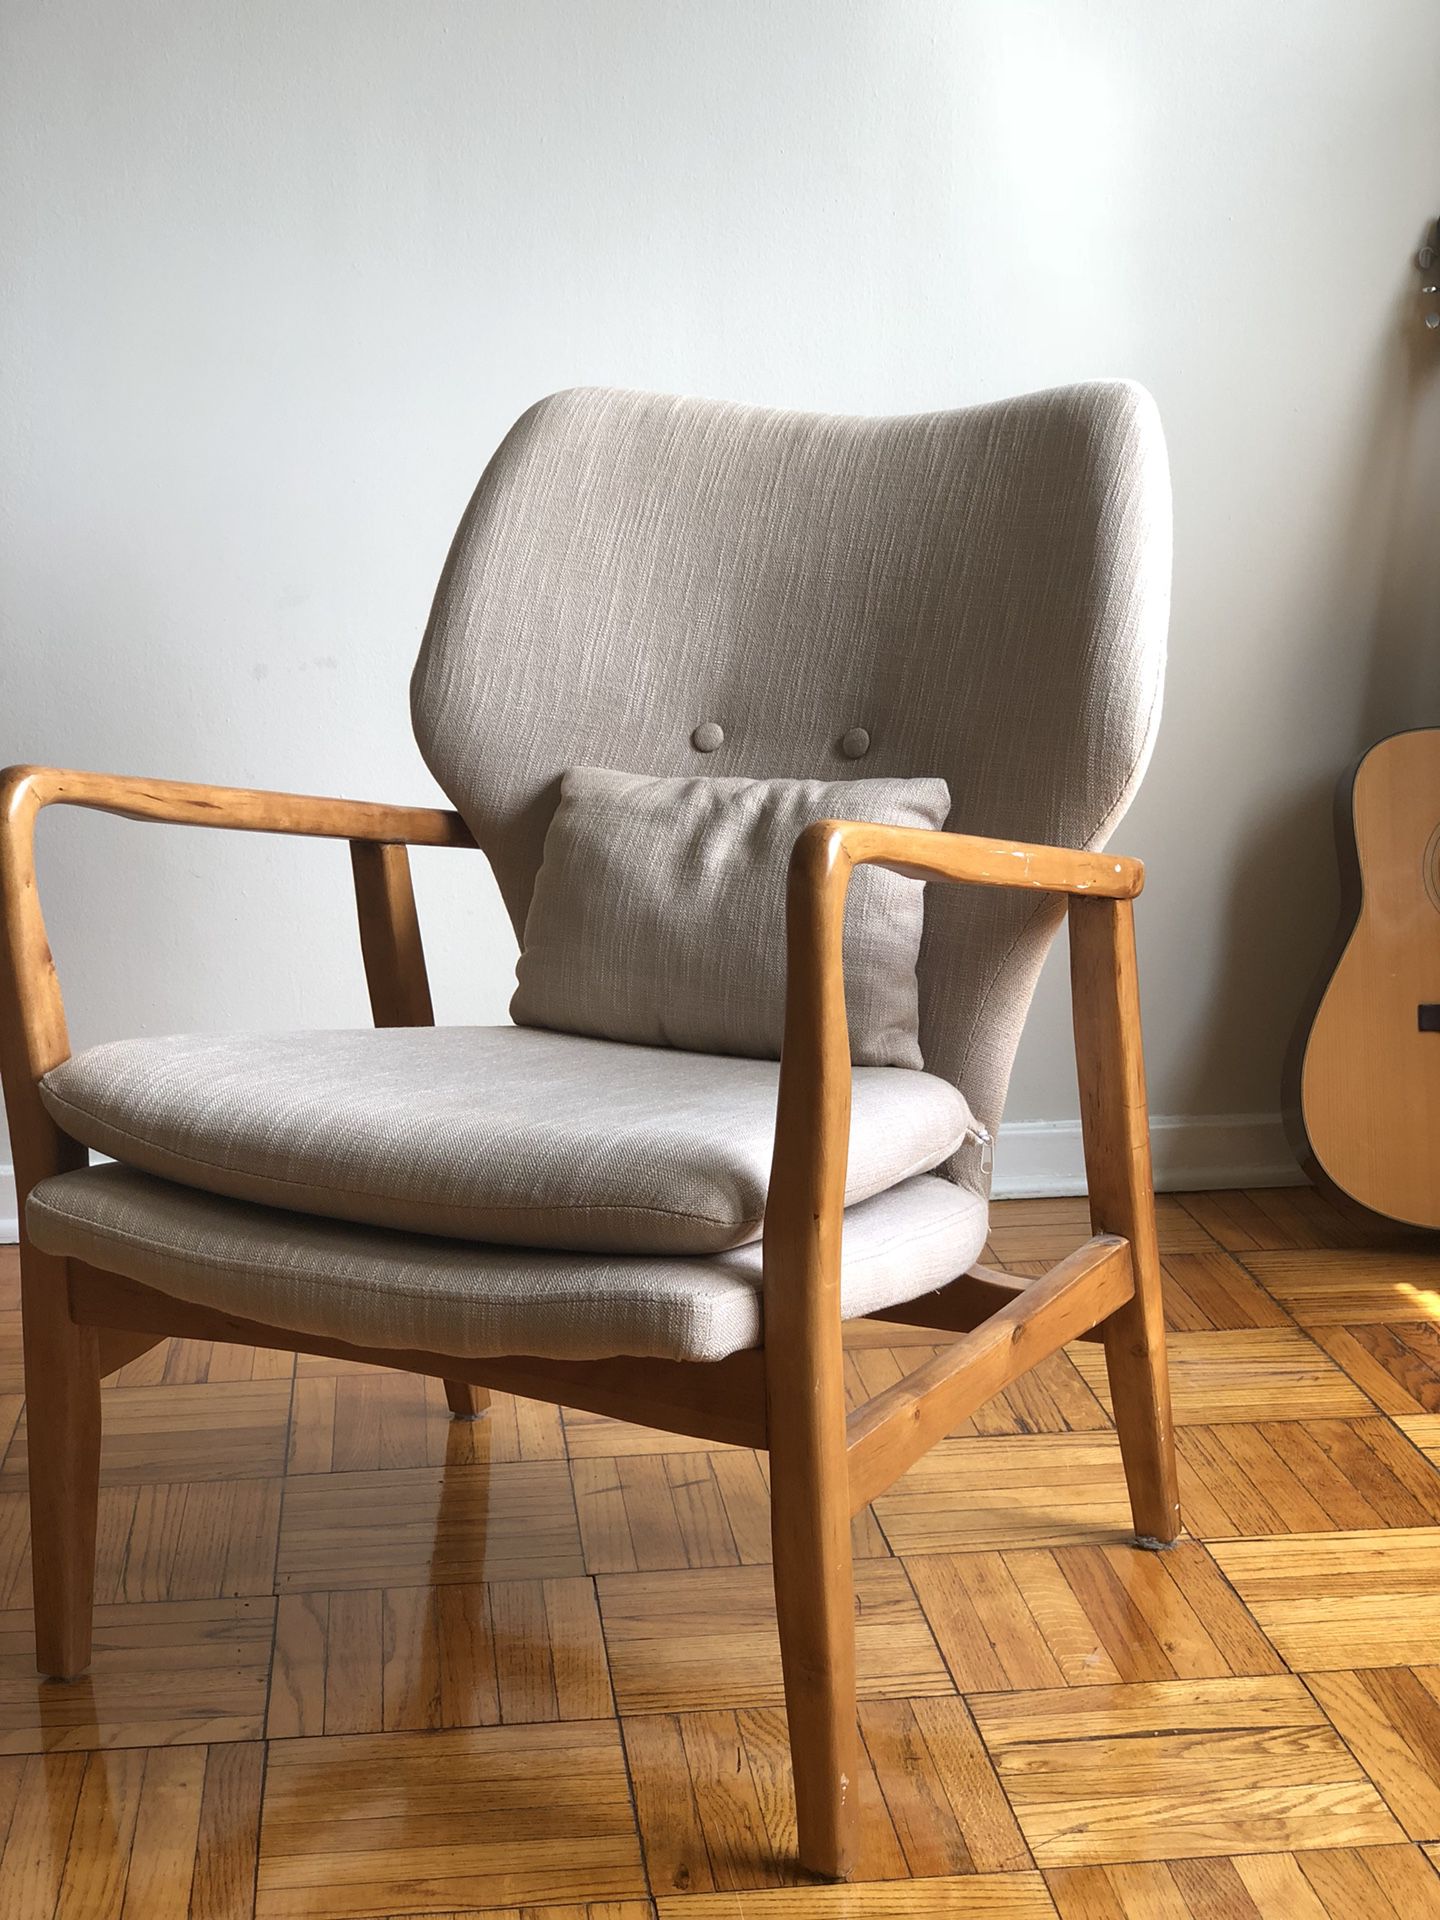 Midcentury chair with pillow